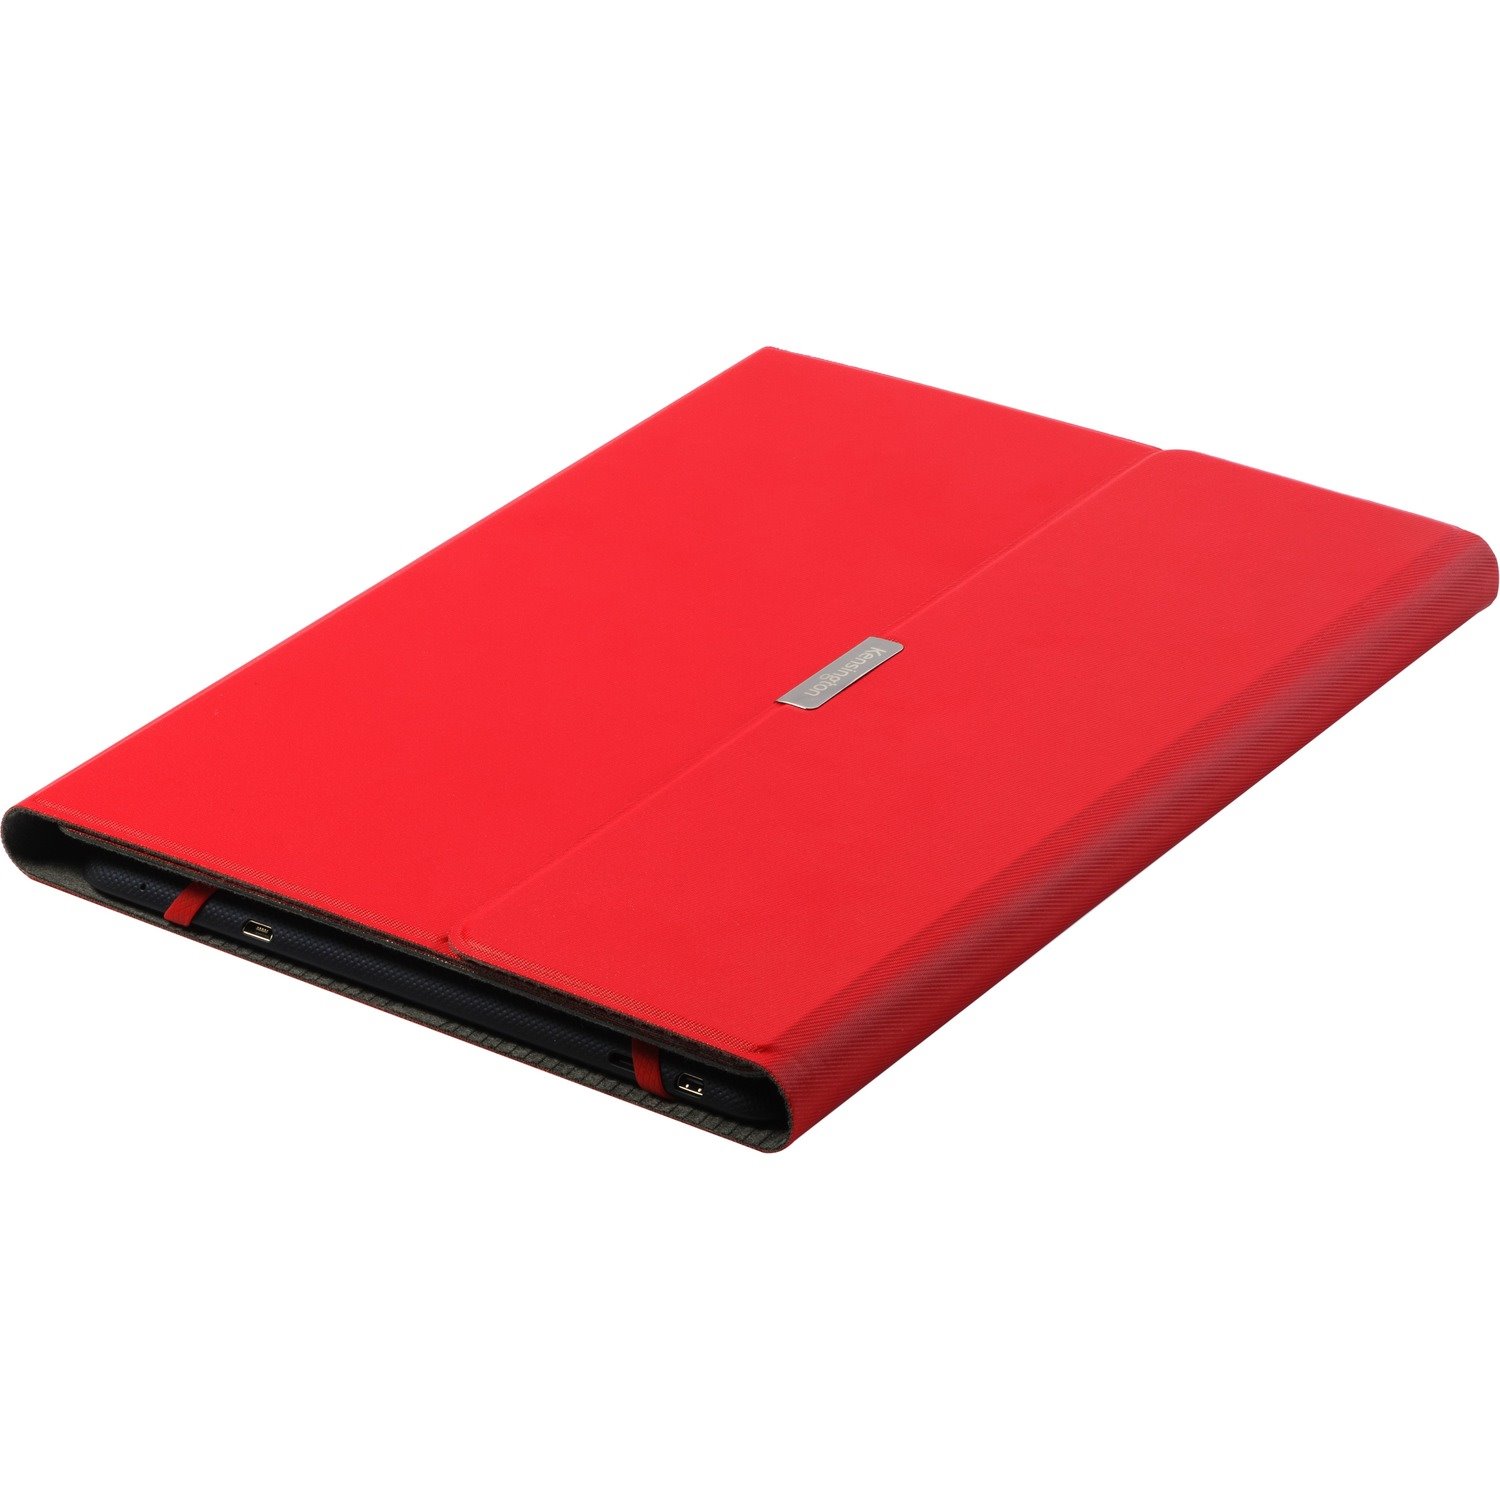 Kensington Comercio Fit 97242 Carrying Case (Folio) for 22.9 cm (9") to 25.4 cm (10") Tablet - Red